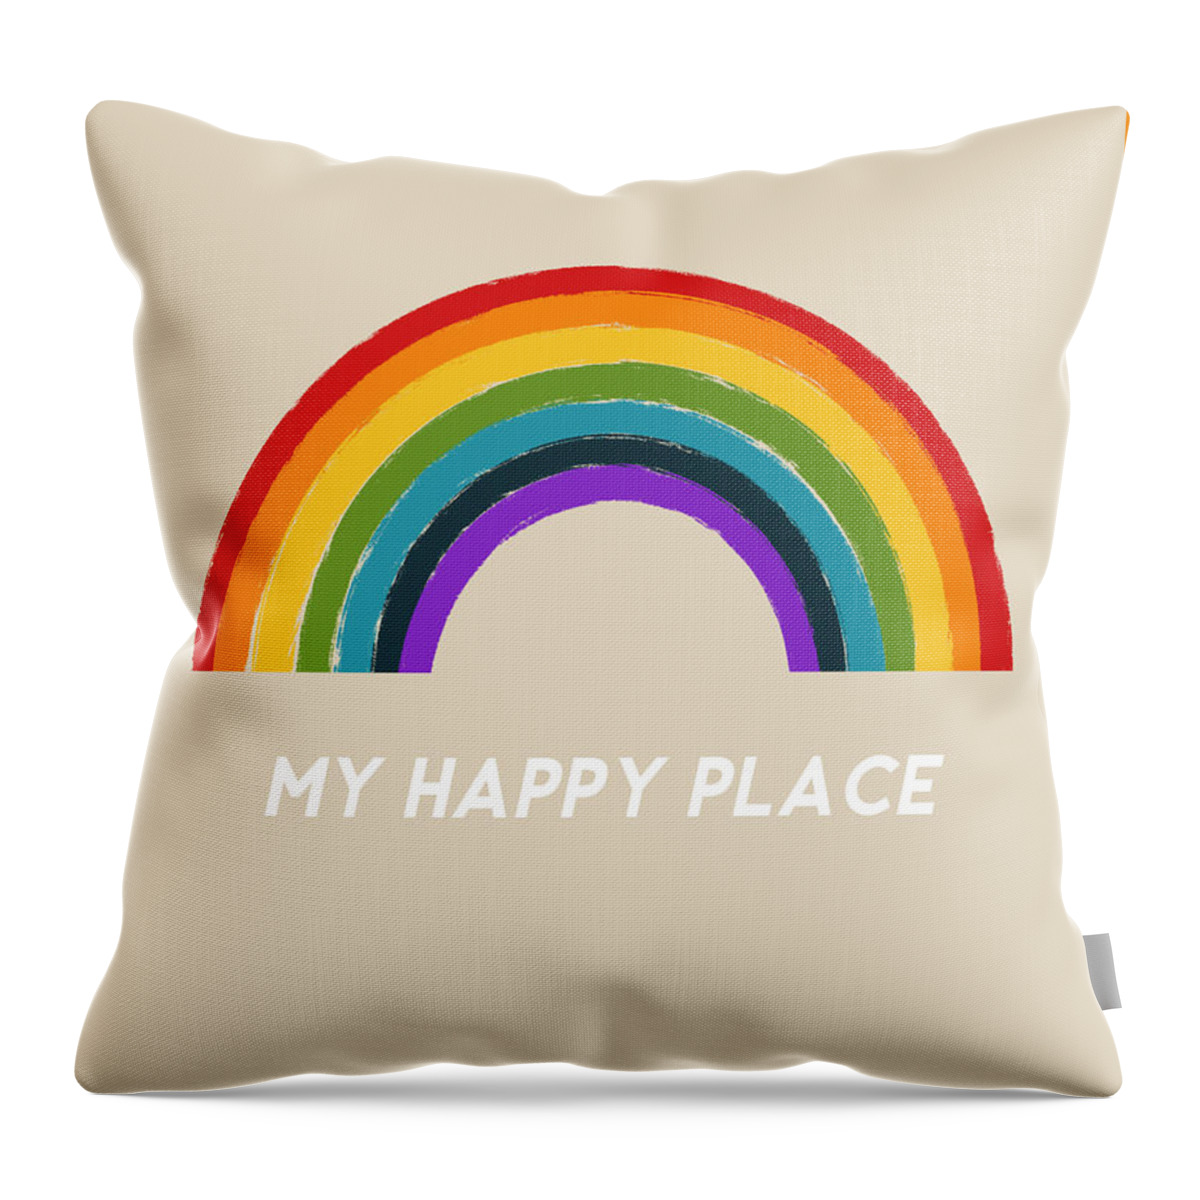 Rainbow Throw Pillow featuring the mixed media Happy Place Rainbow- Art by Linda Woods by Linda Woods